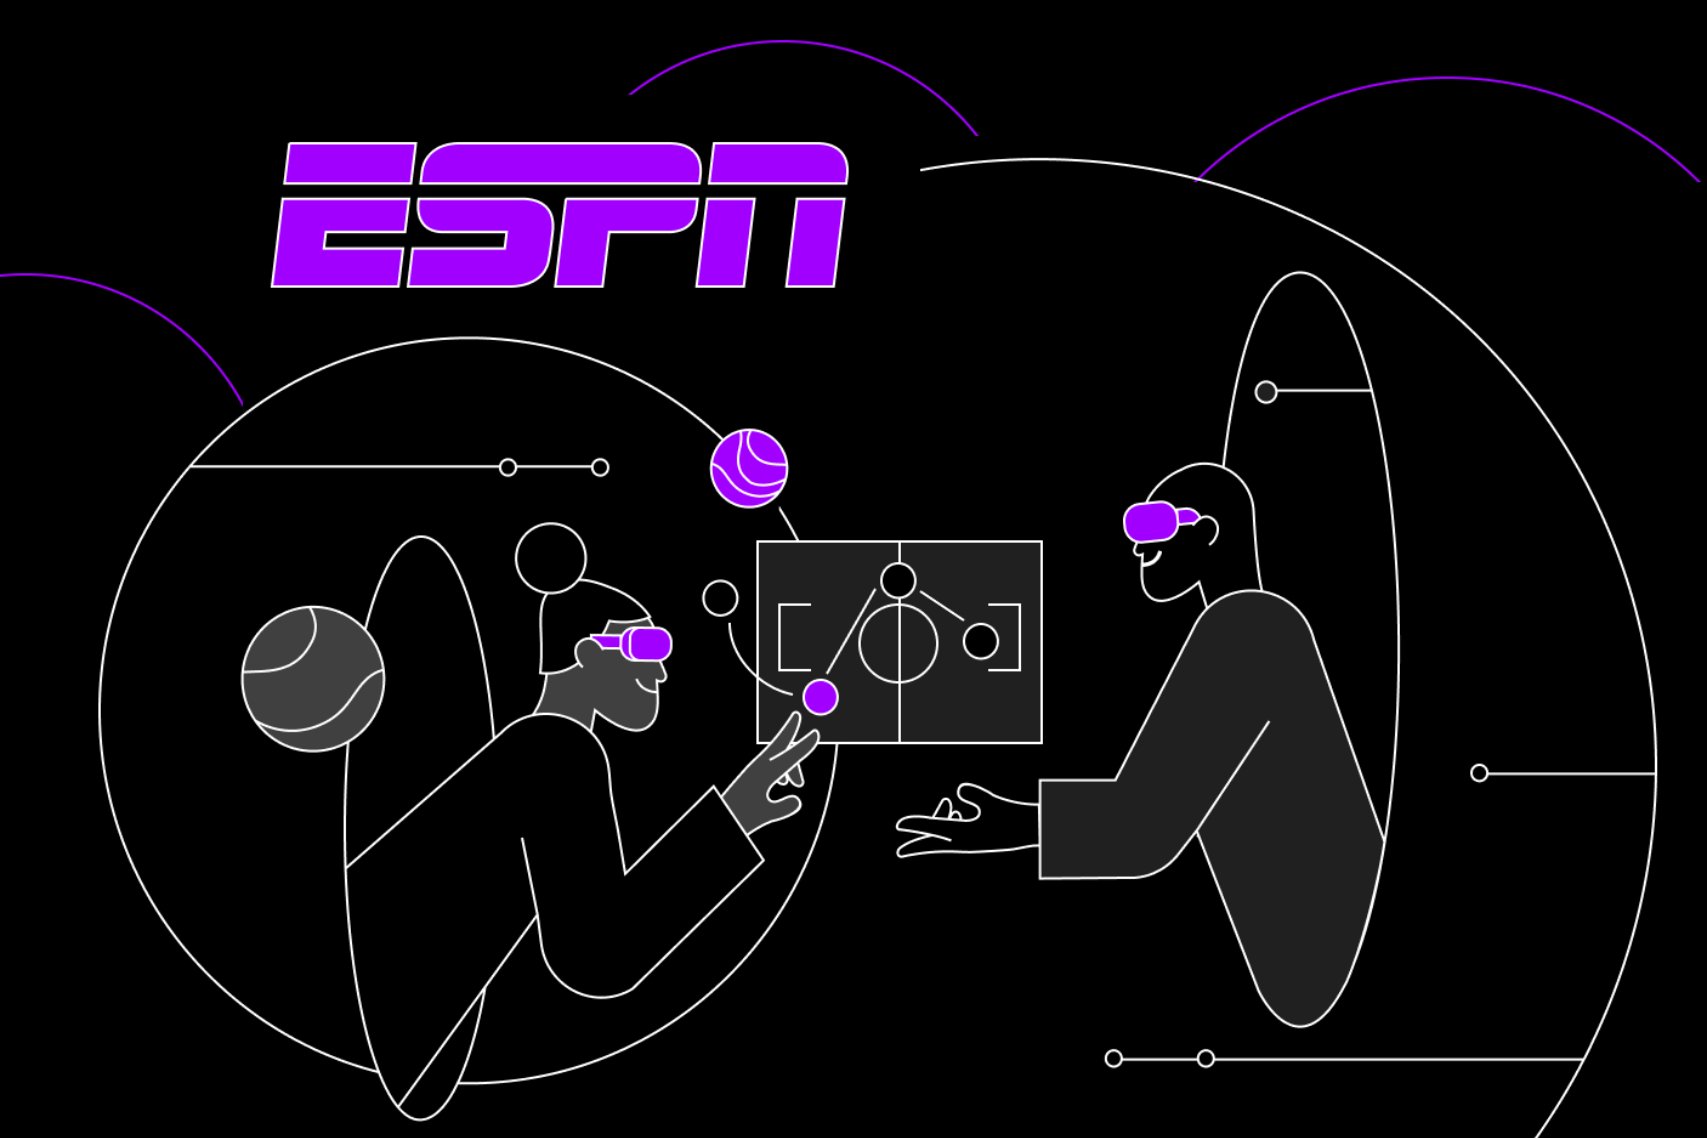 Game time work with espn on its edge innovation center illustration